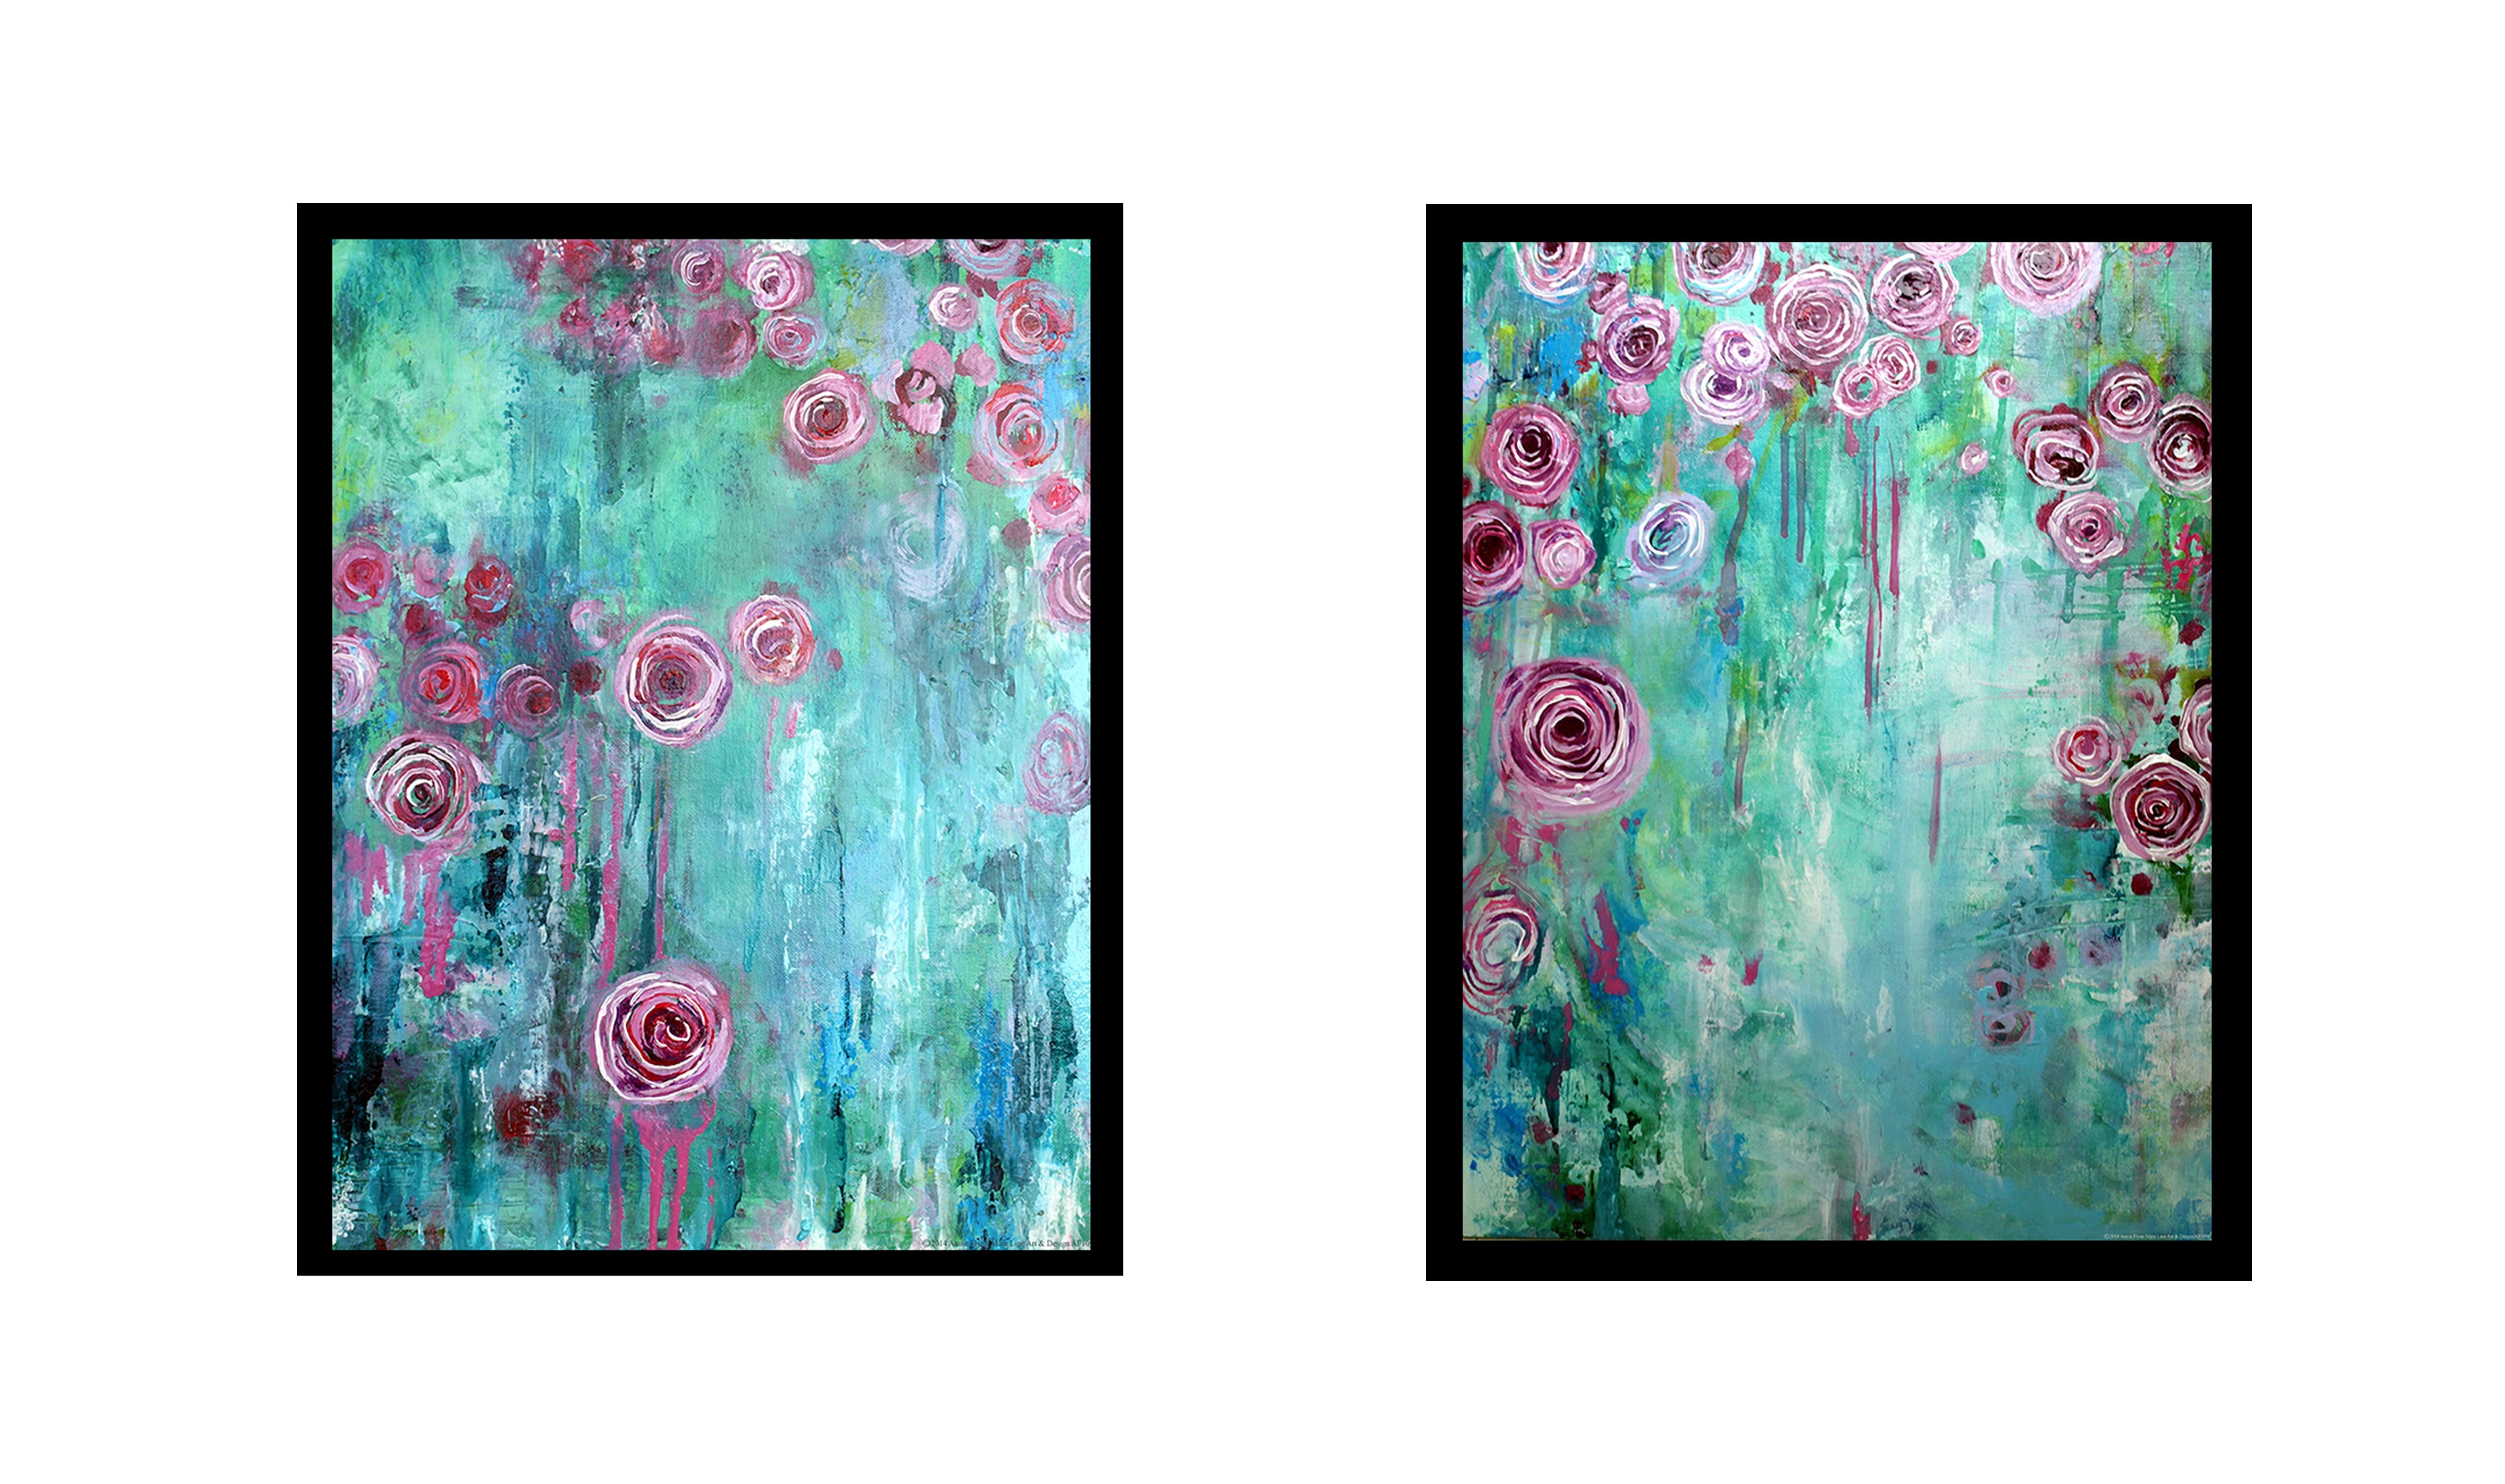 CANVAS Abstract Roses 2 Piece SET by Annie Flynn 16x12 Acrylic Art Painting  Reproduction Set - Bed Bath & Beyond - 29158785